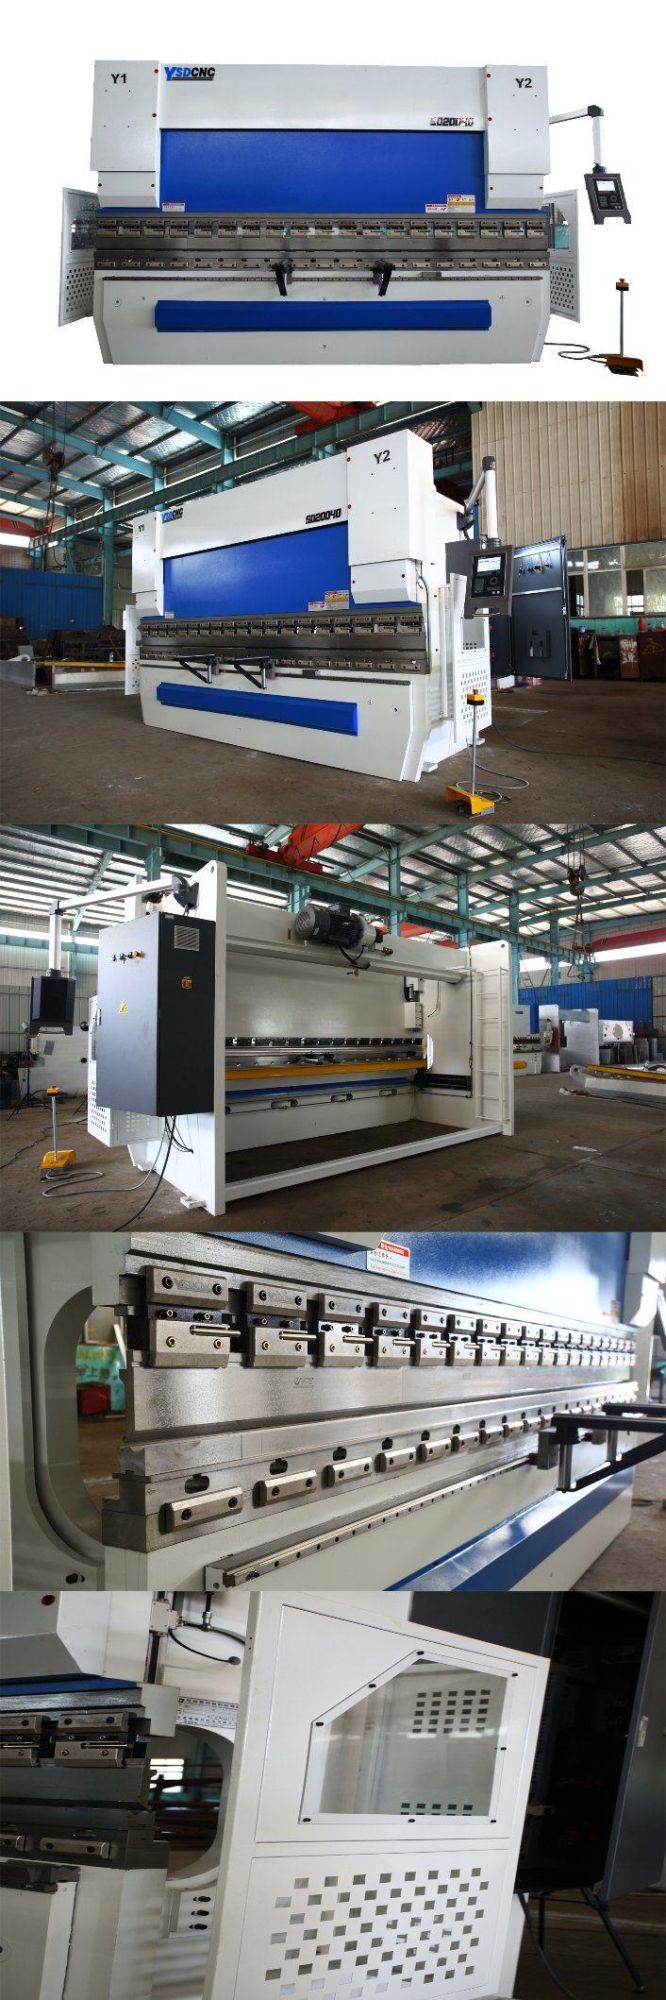 High Quality CNC Automatic Bending Machine for Sale